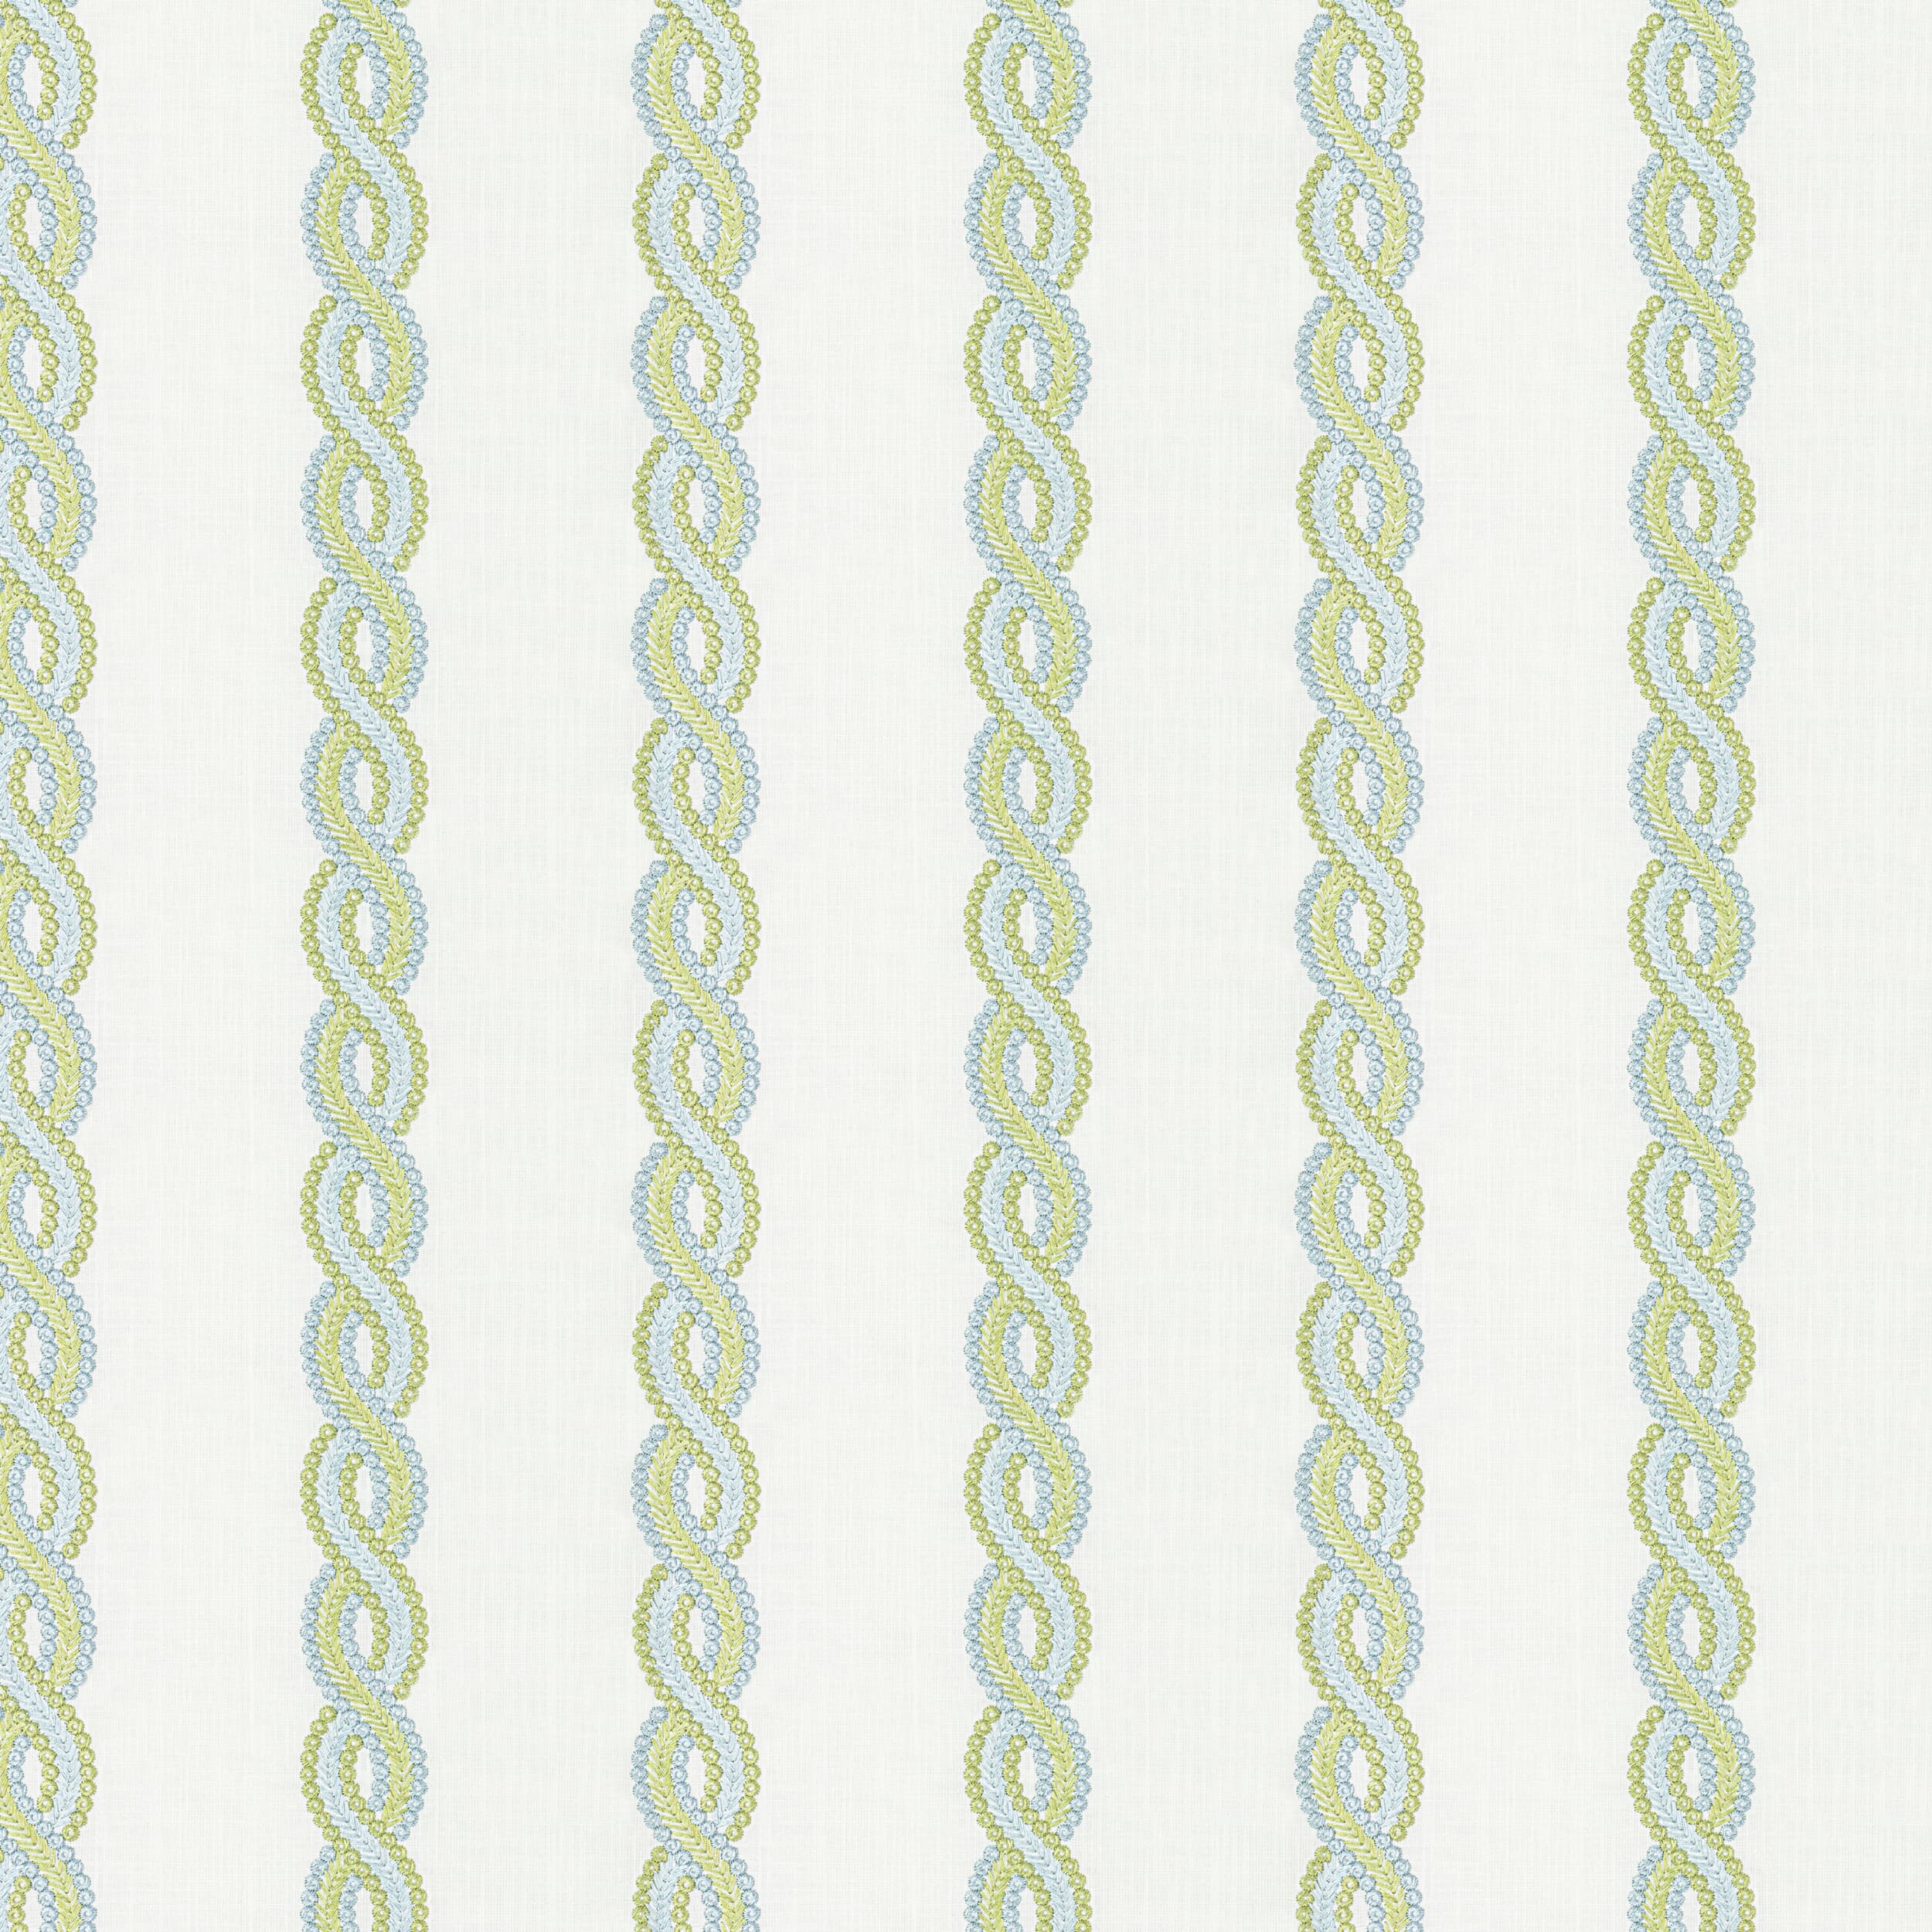 Priceless 1 Chartreuse by Stout Fabric